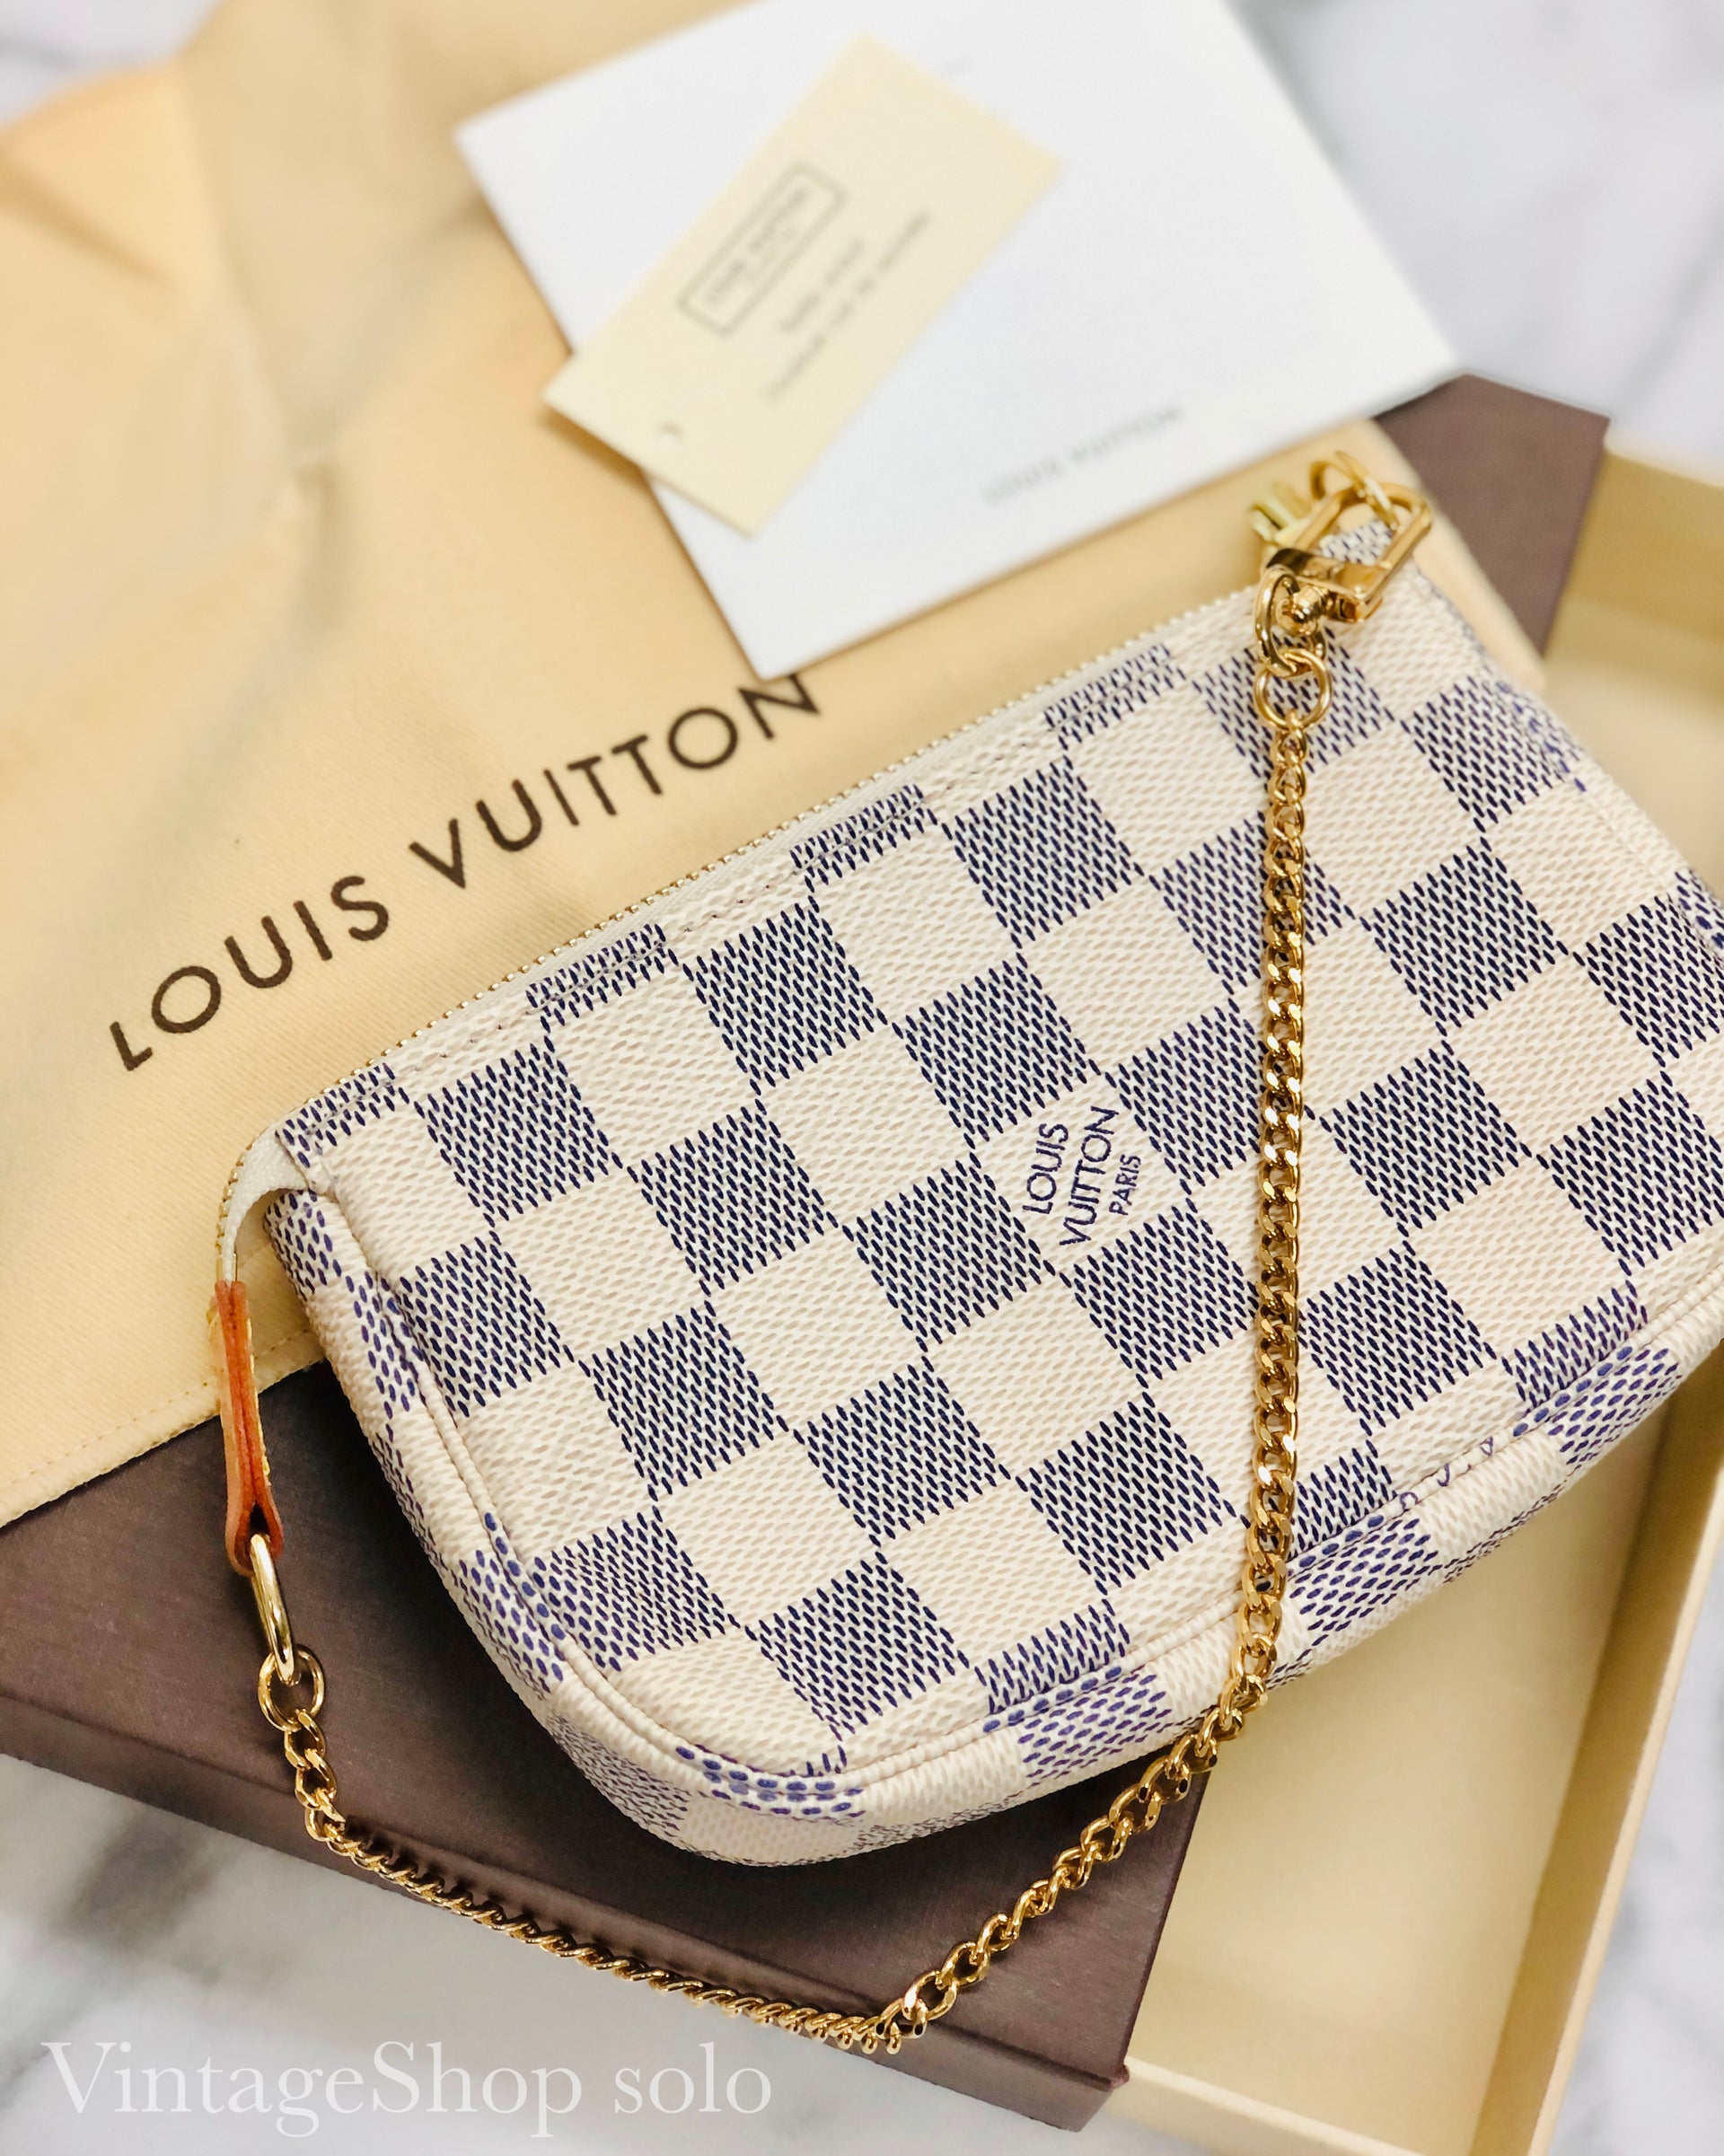 5 Reasons why I got the Louis Vuitton Mini Pochette after the price  increase! 